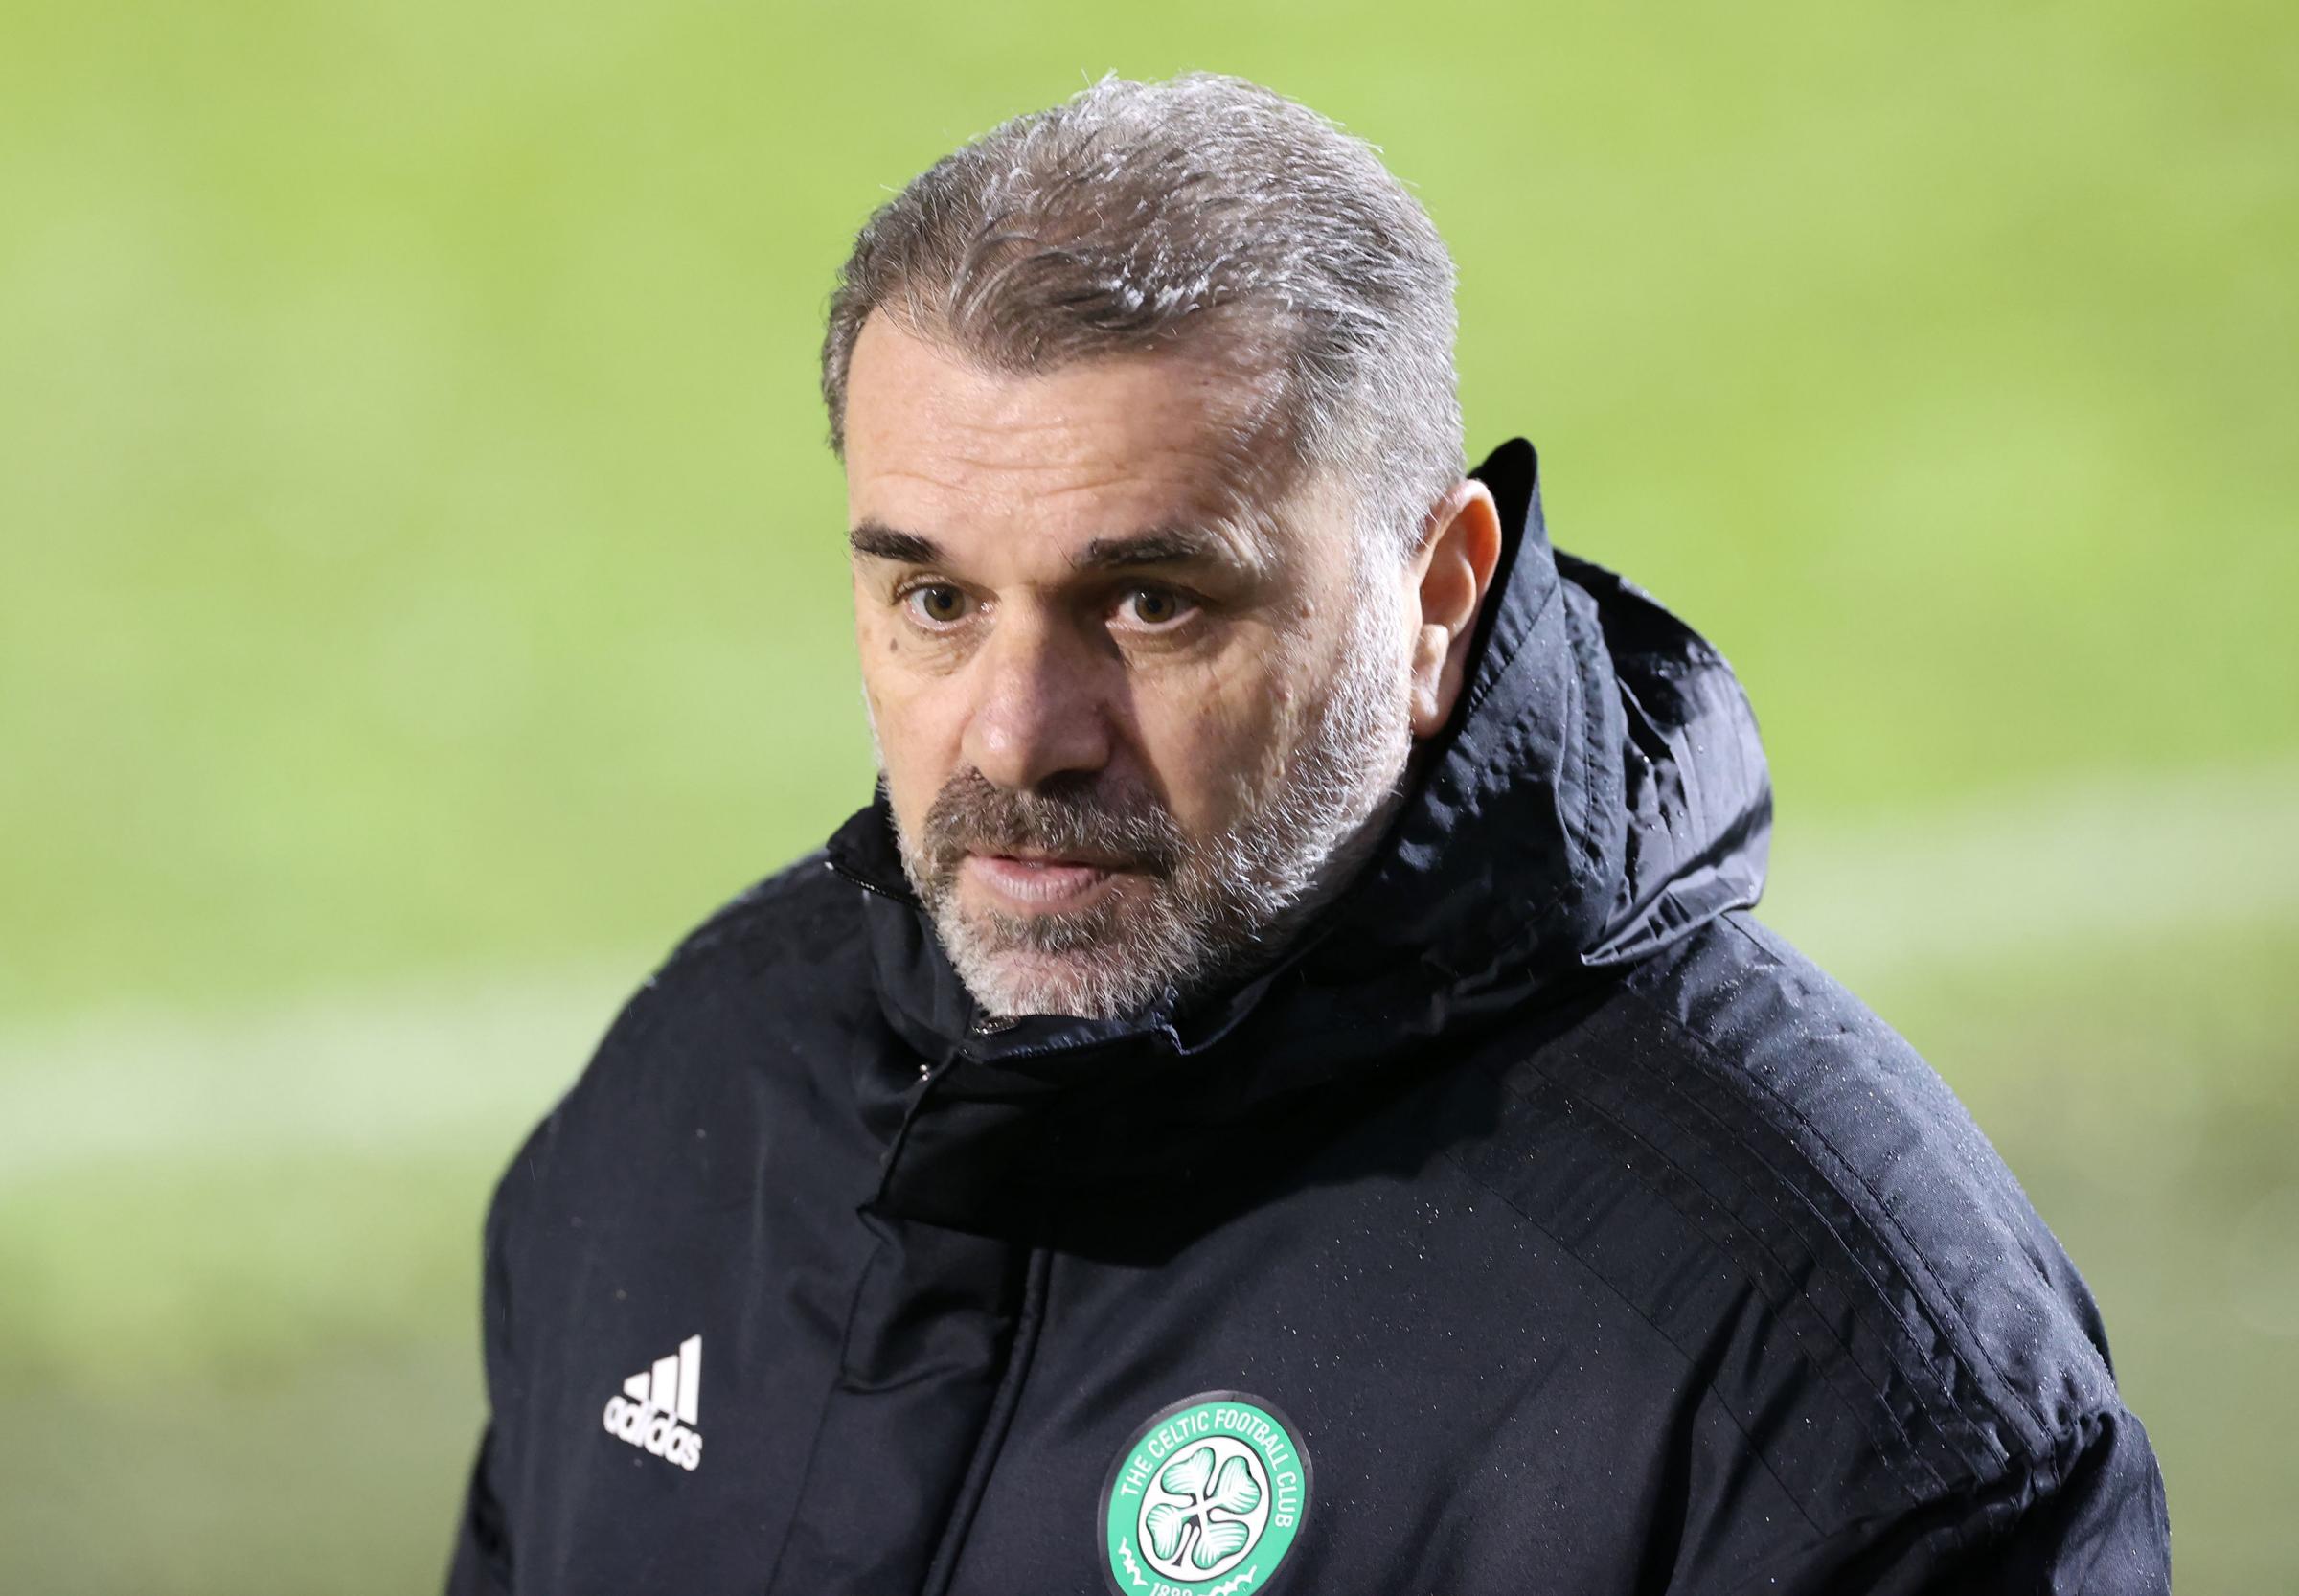 Ange Postecoglou told Celtic players not to go into tackles against Alloa due to injury fears